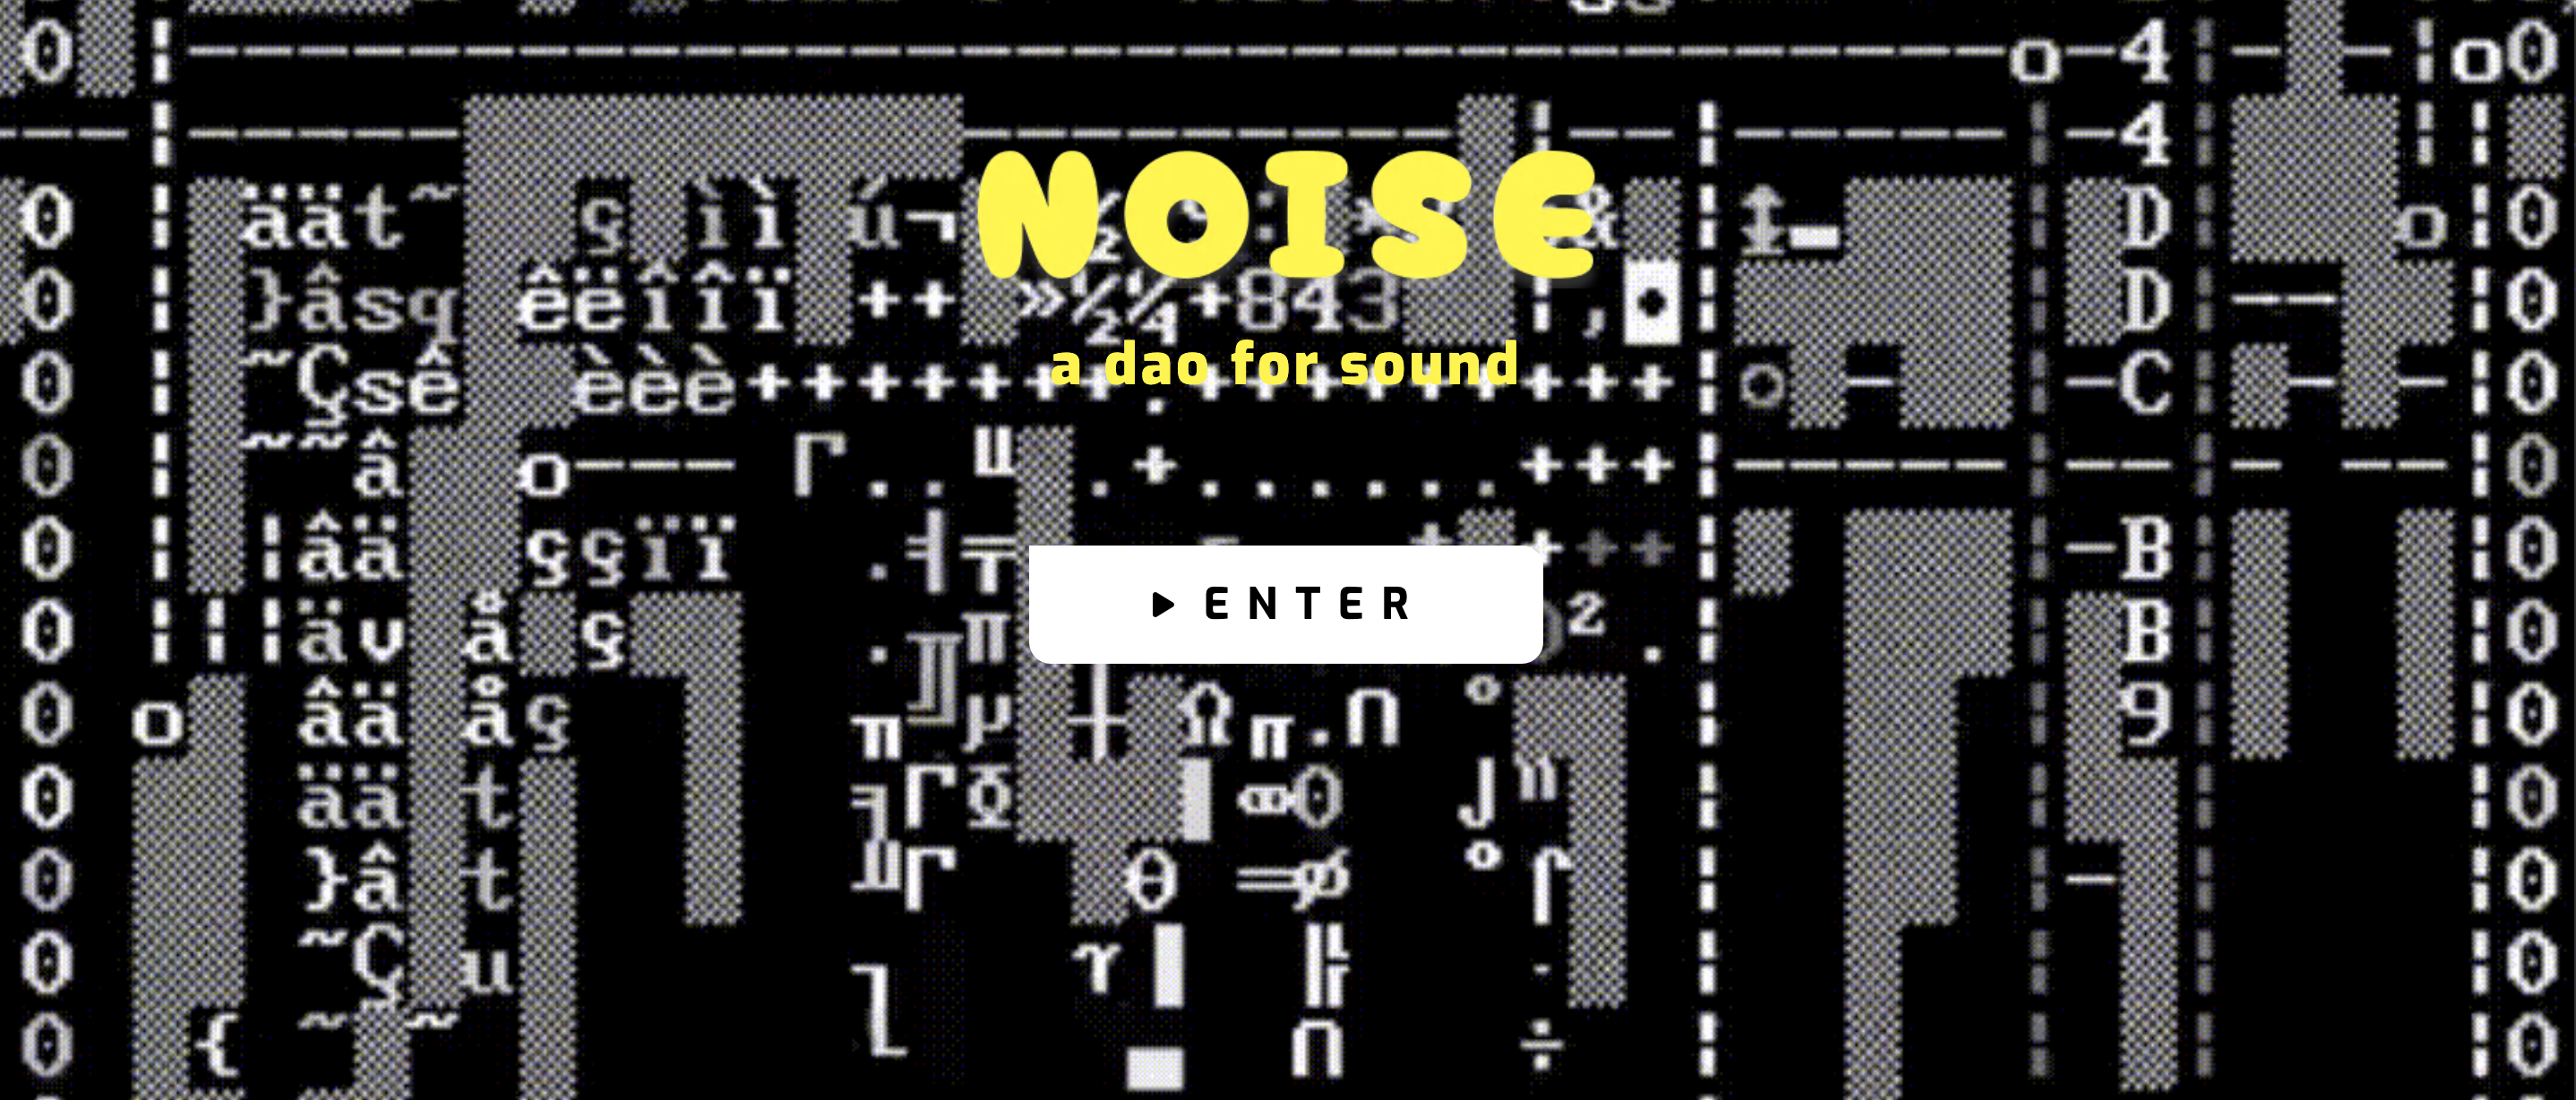 NOISE represents a new class of actor in the music space 